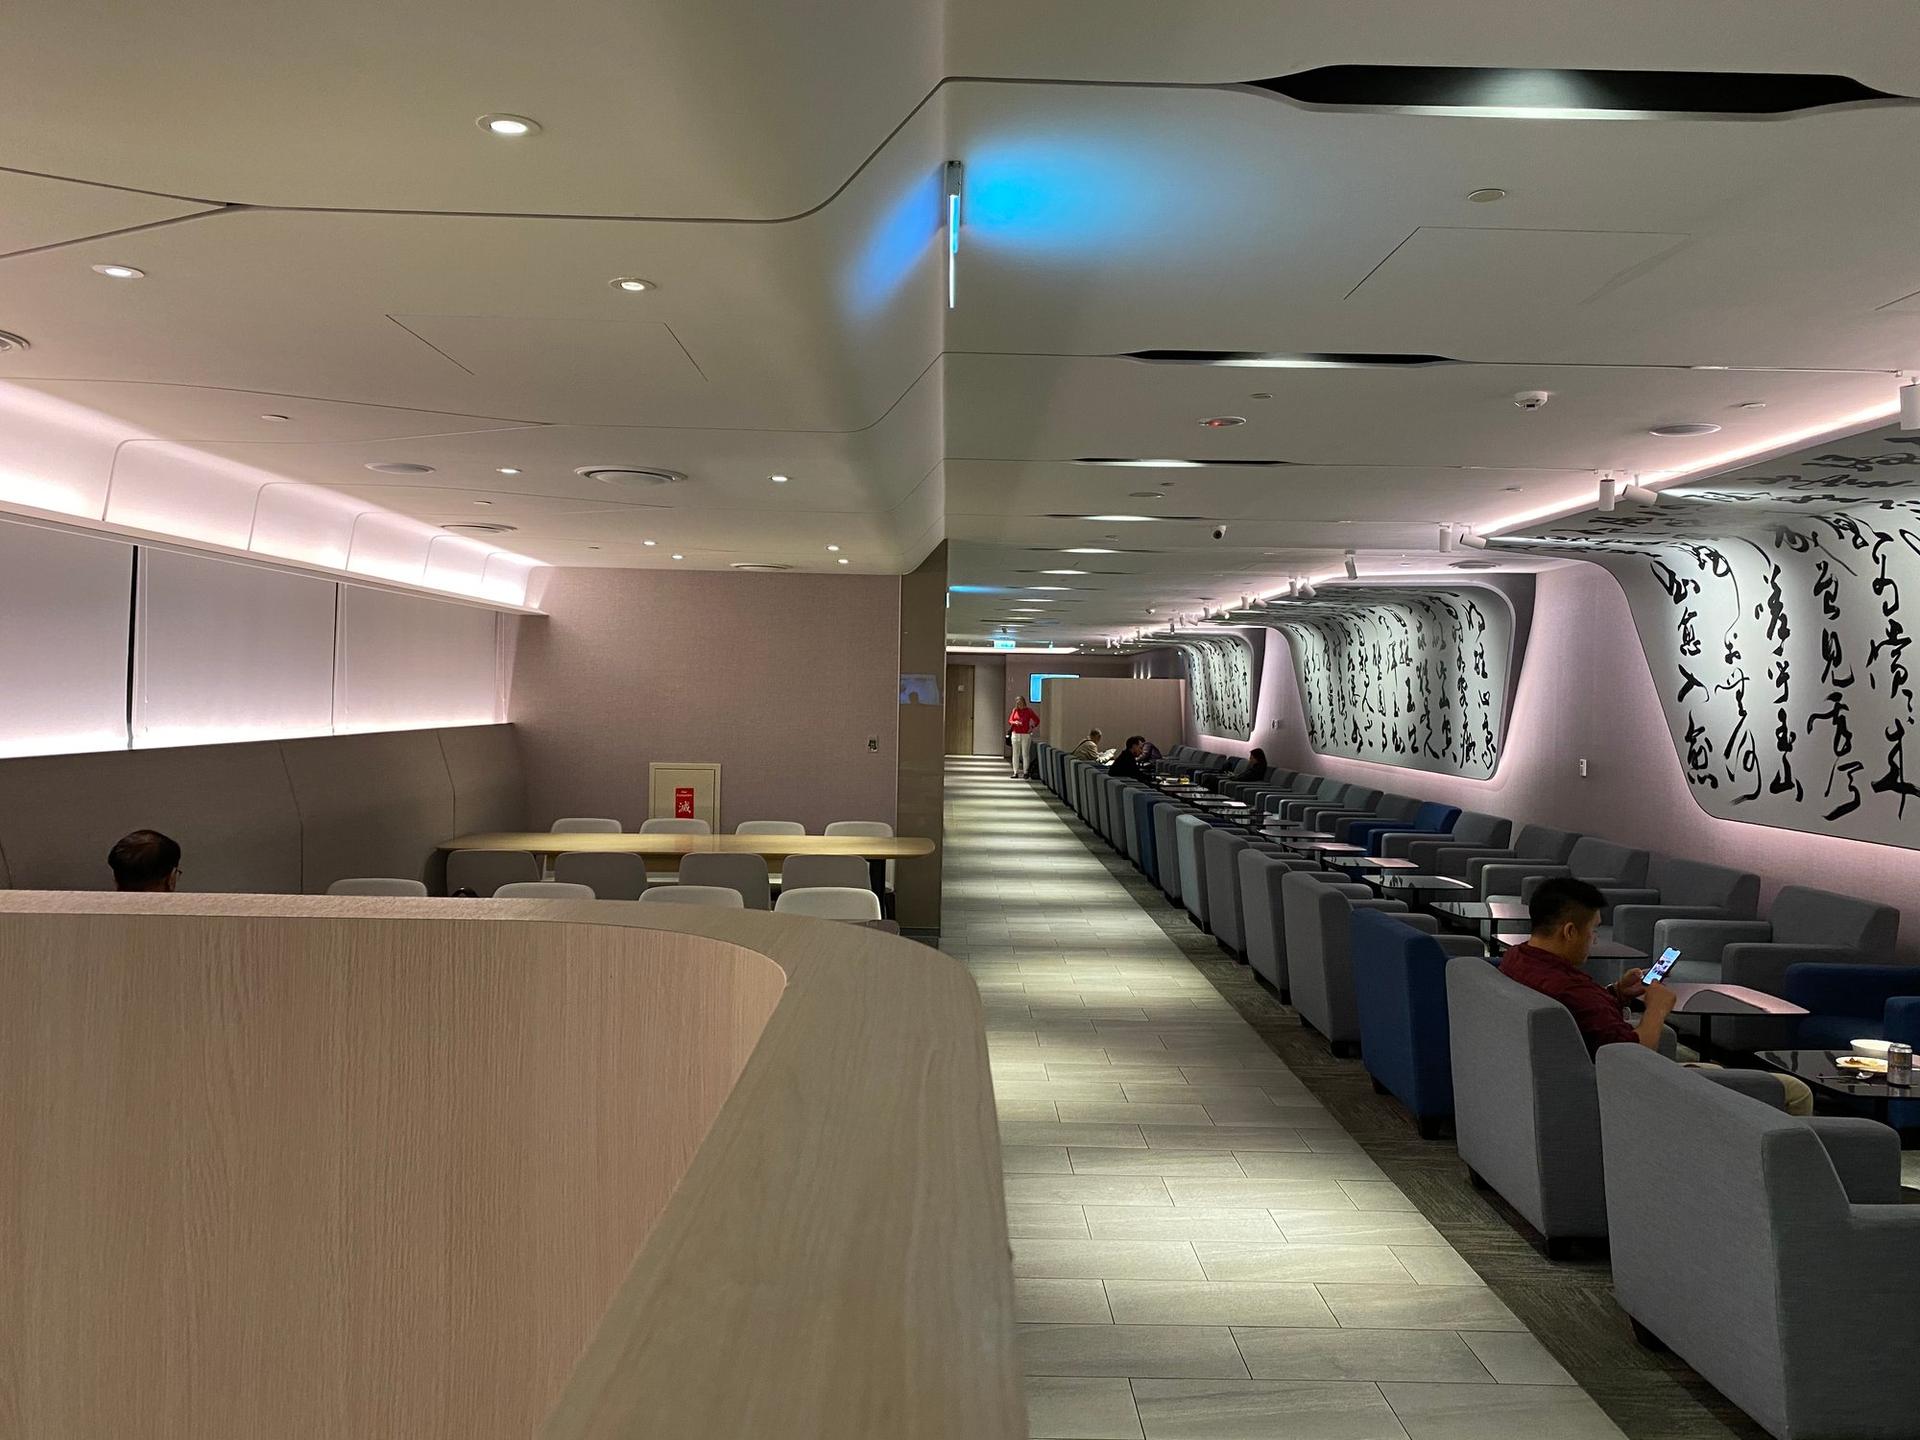 China Airlines Lounge (V2) image 18 of 20